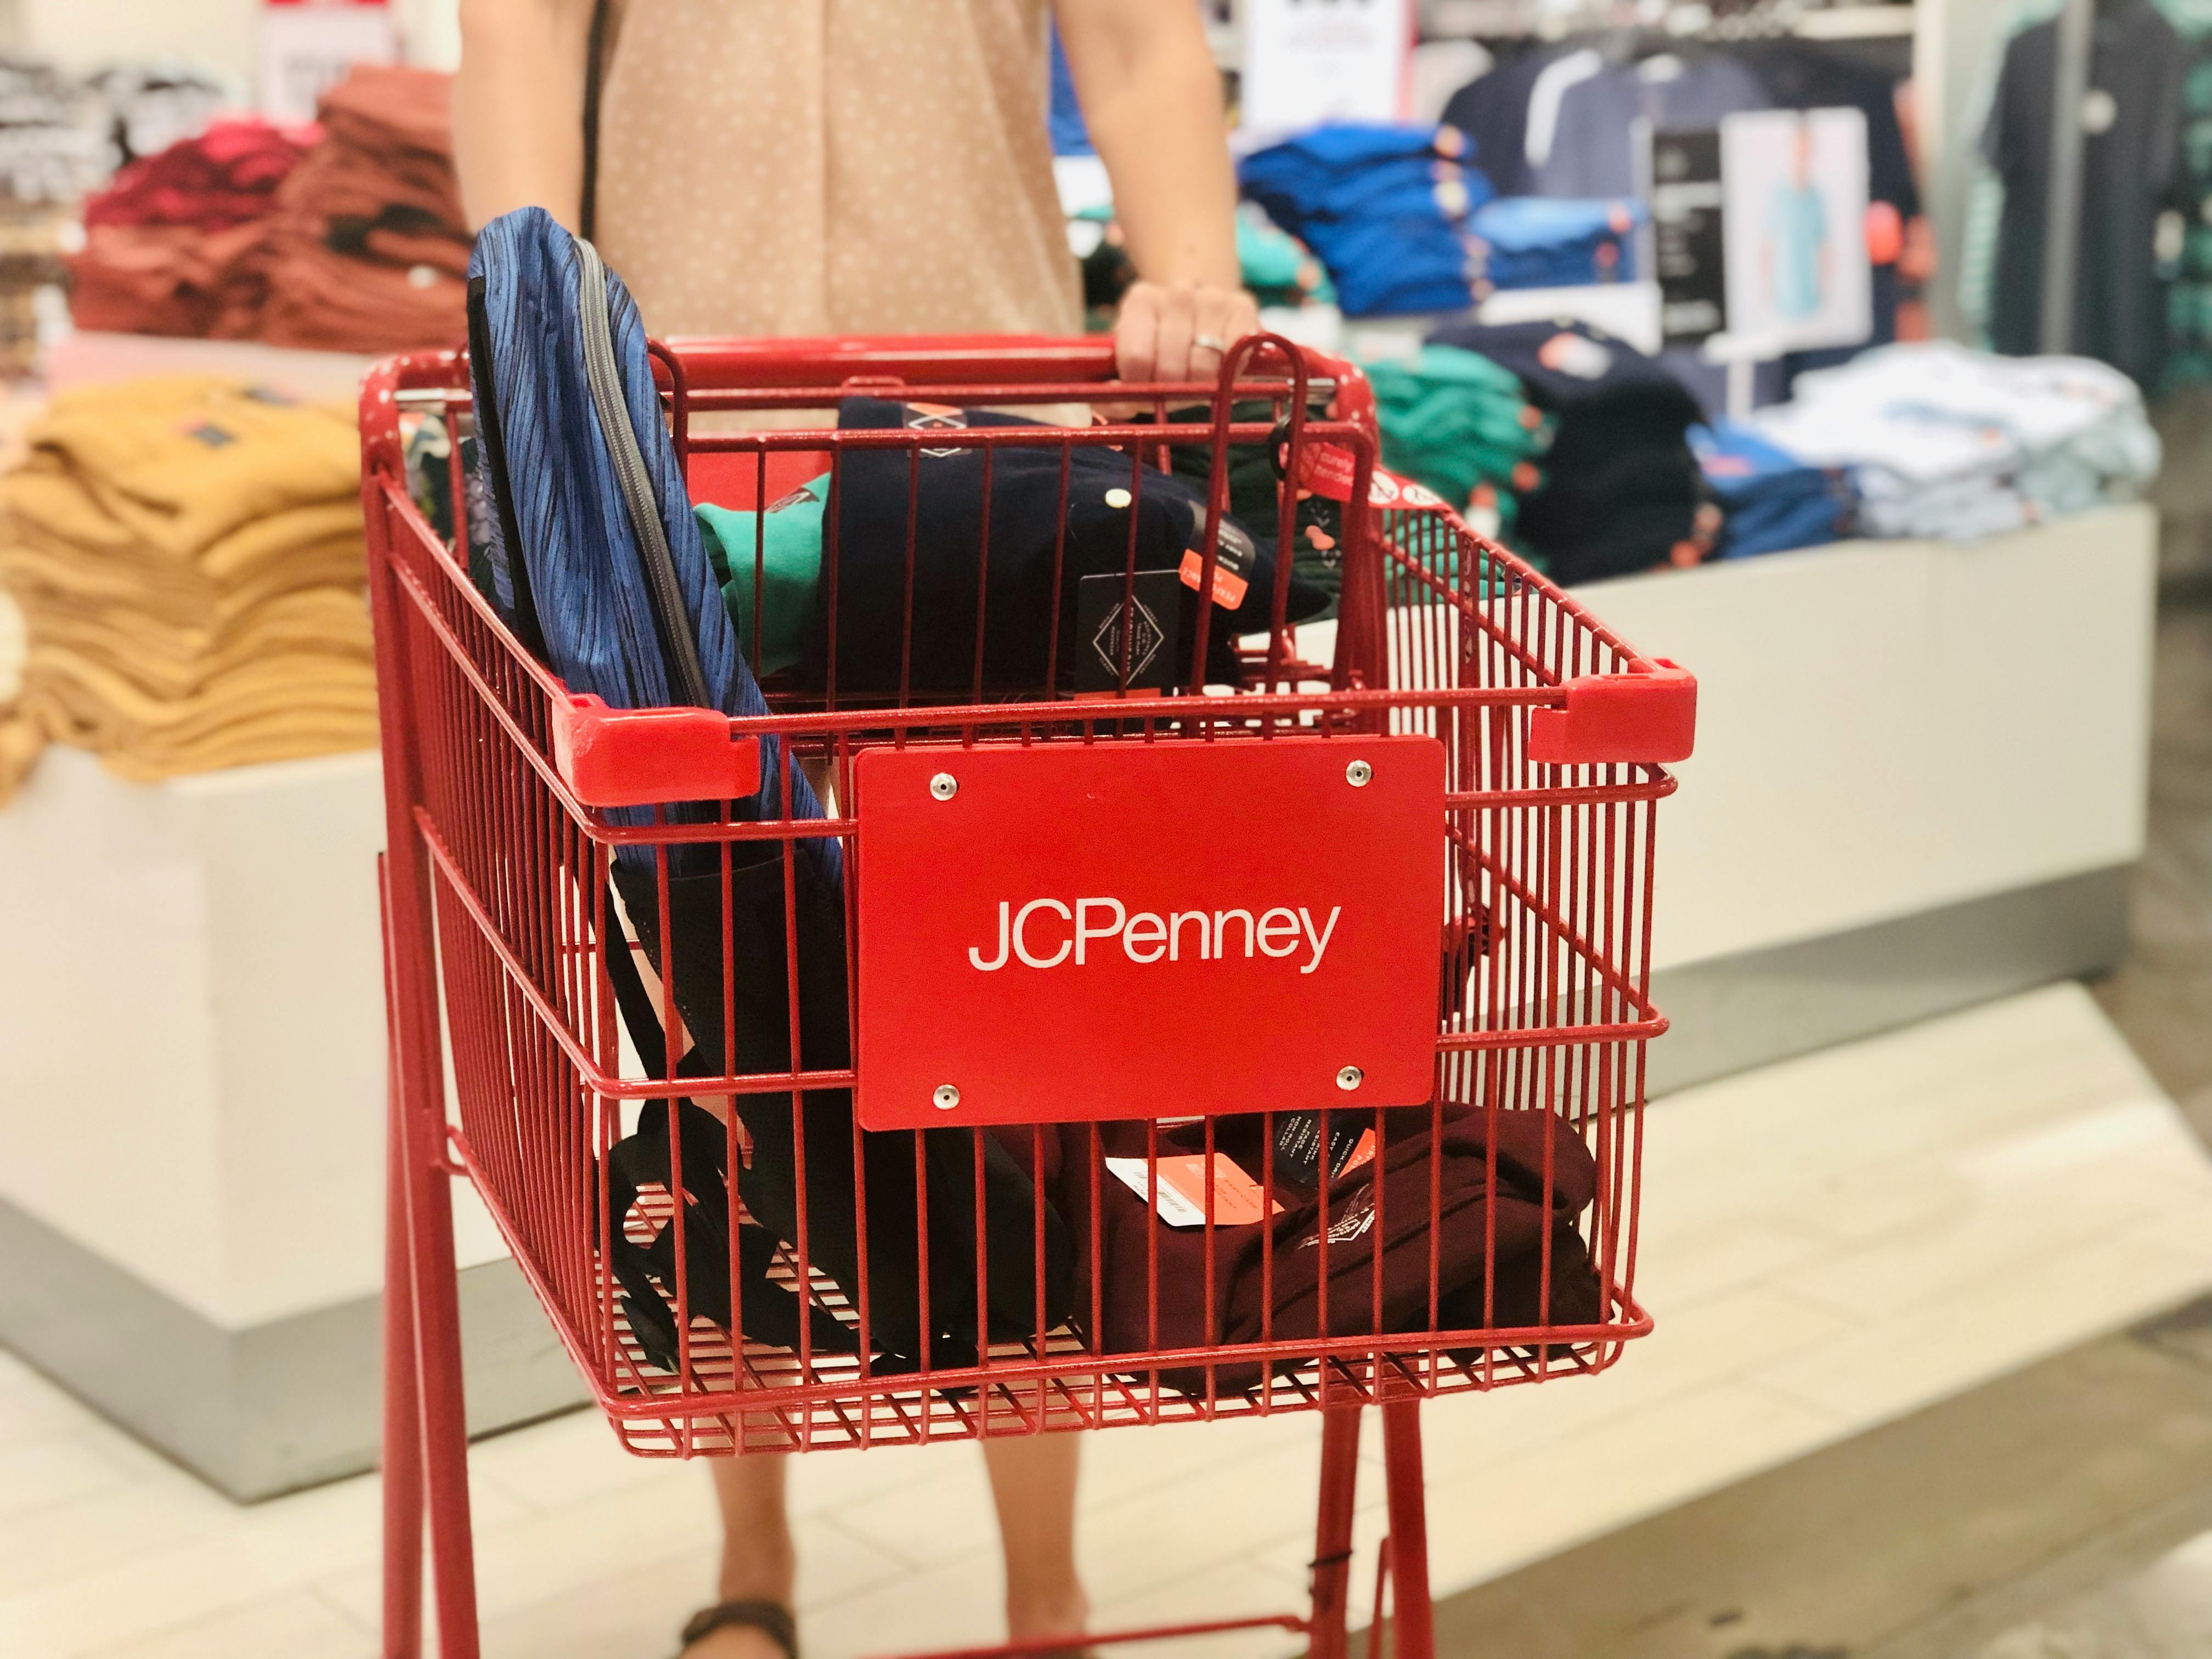 Jcpenney clearance Sale, JCPenney Shop with me